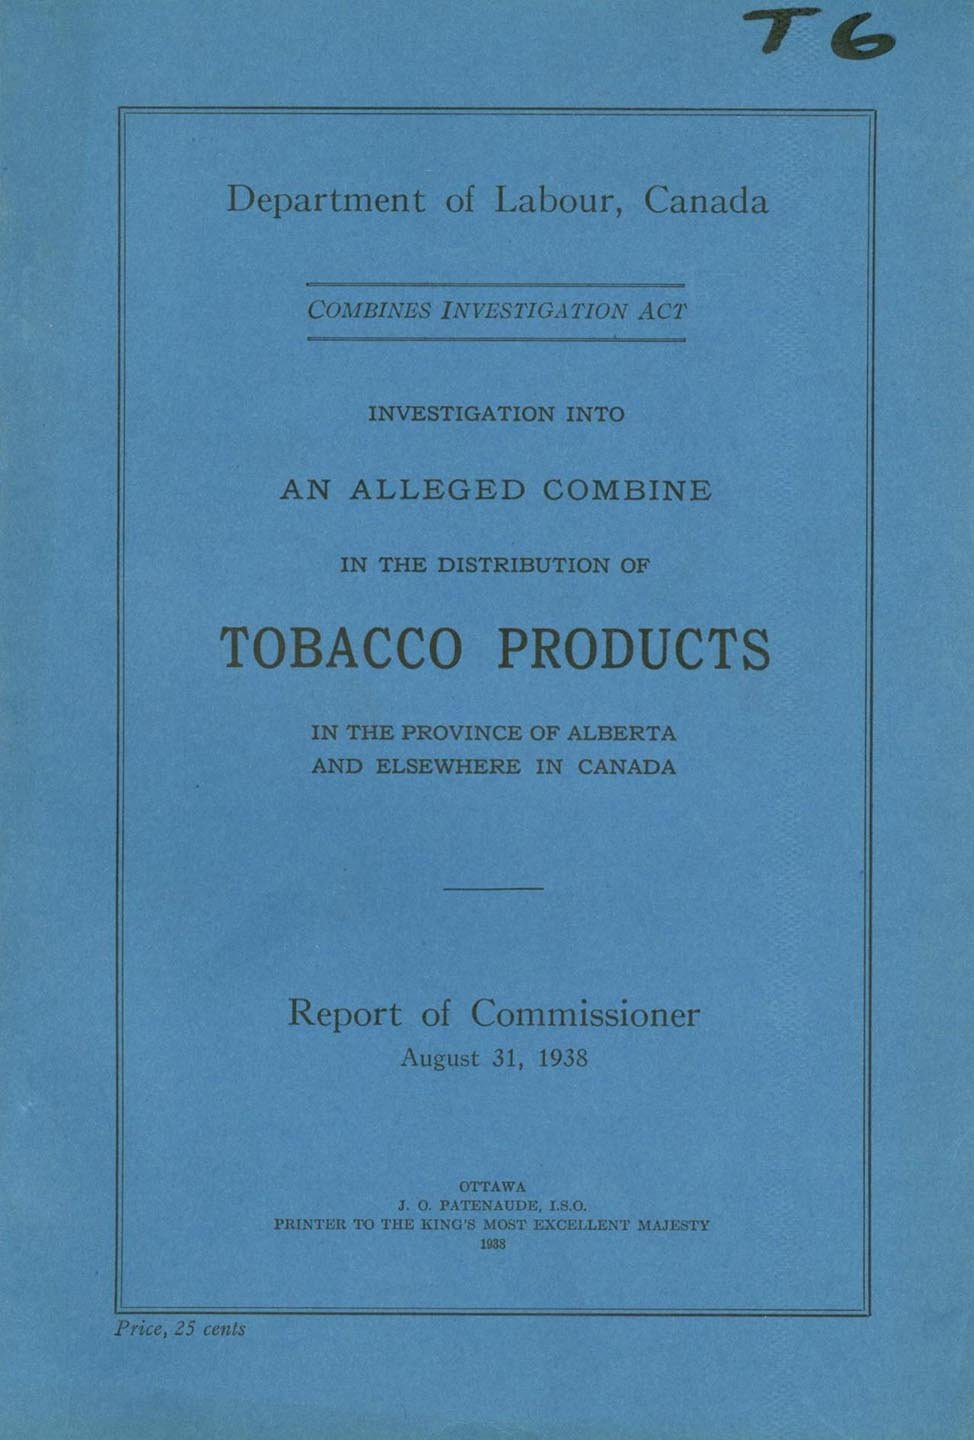 Investigation Into An Alleged Combine in the Distribution of Tobacco Products in the Province of Alberta and Elsewhere in Canada